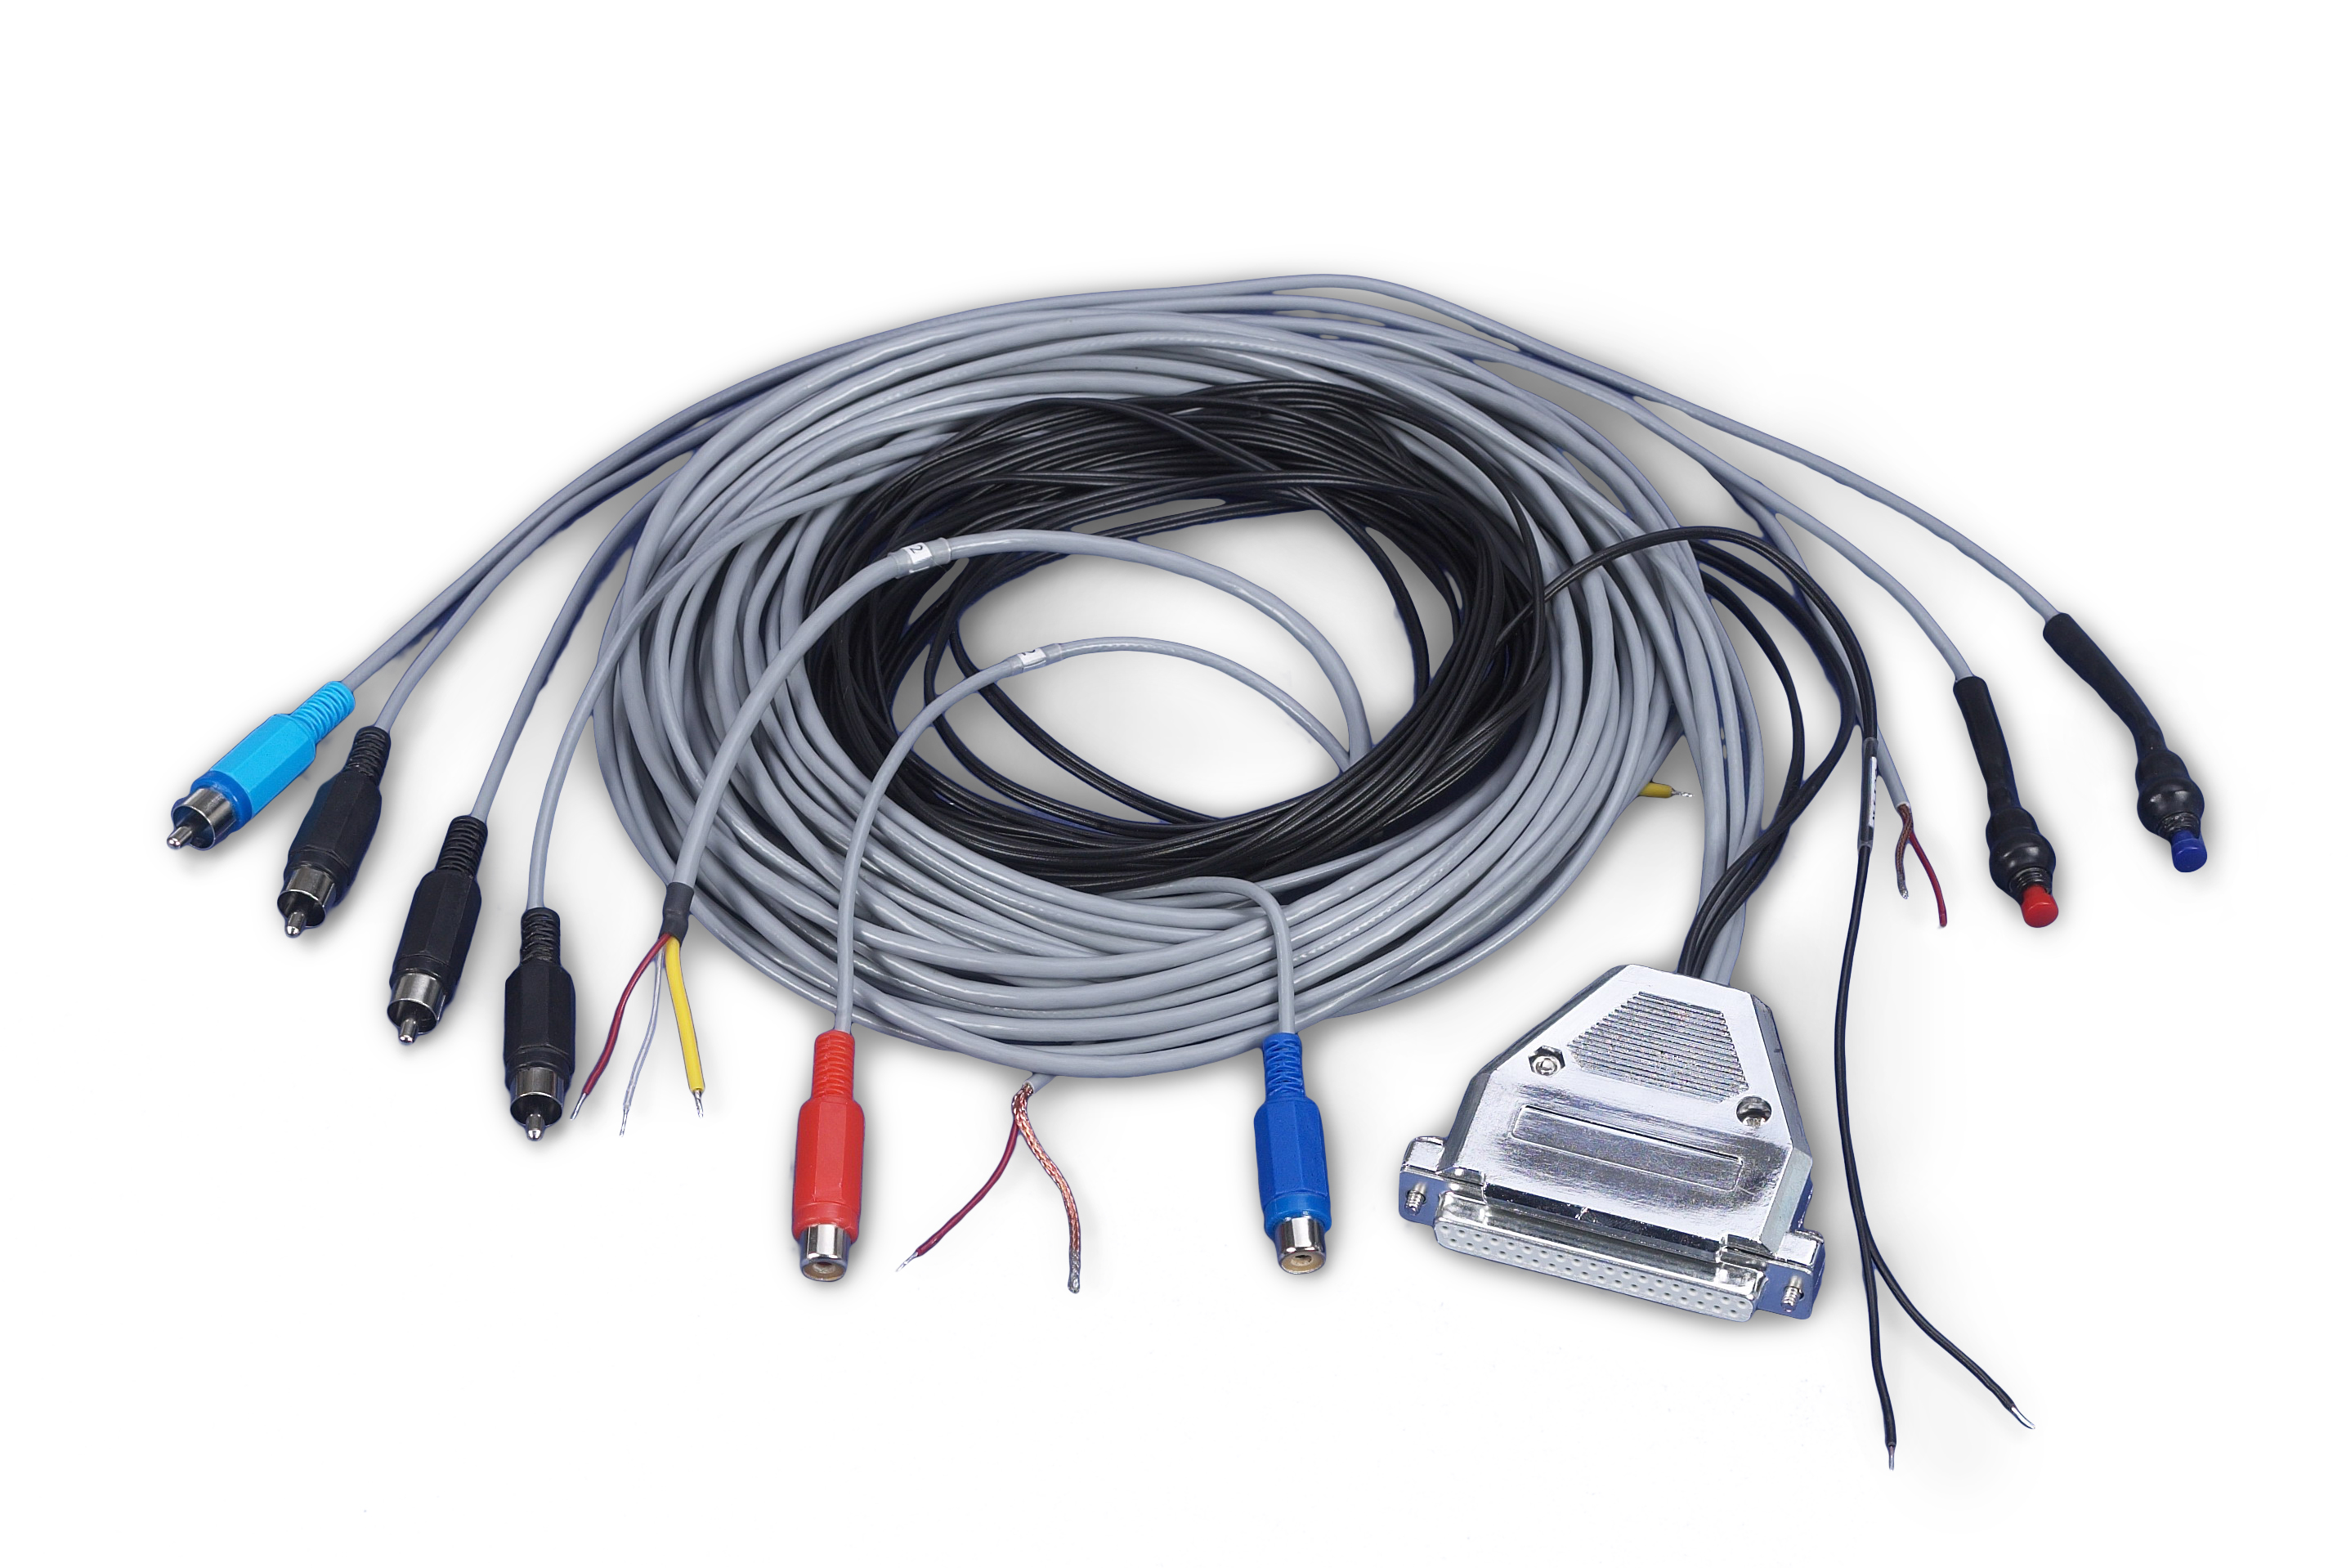 KP - Cable Extension product picture